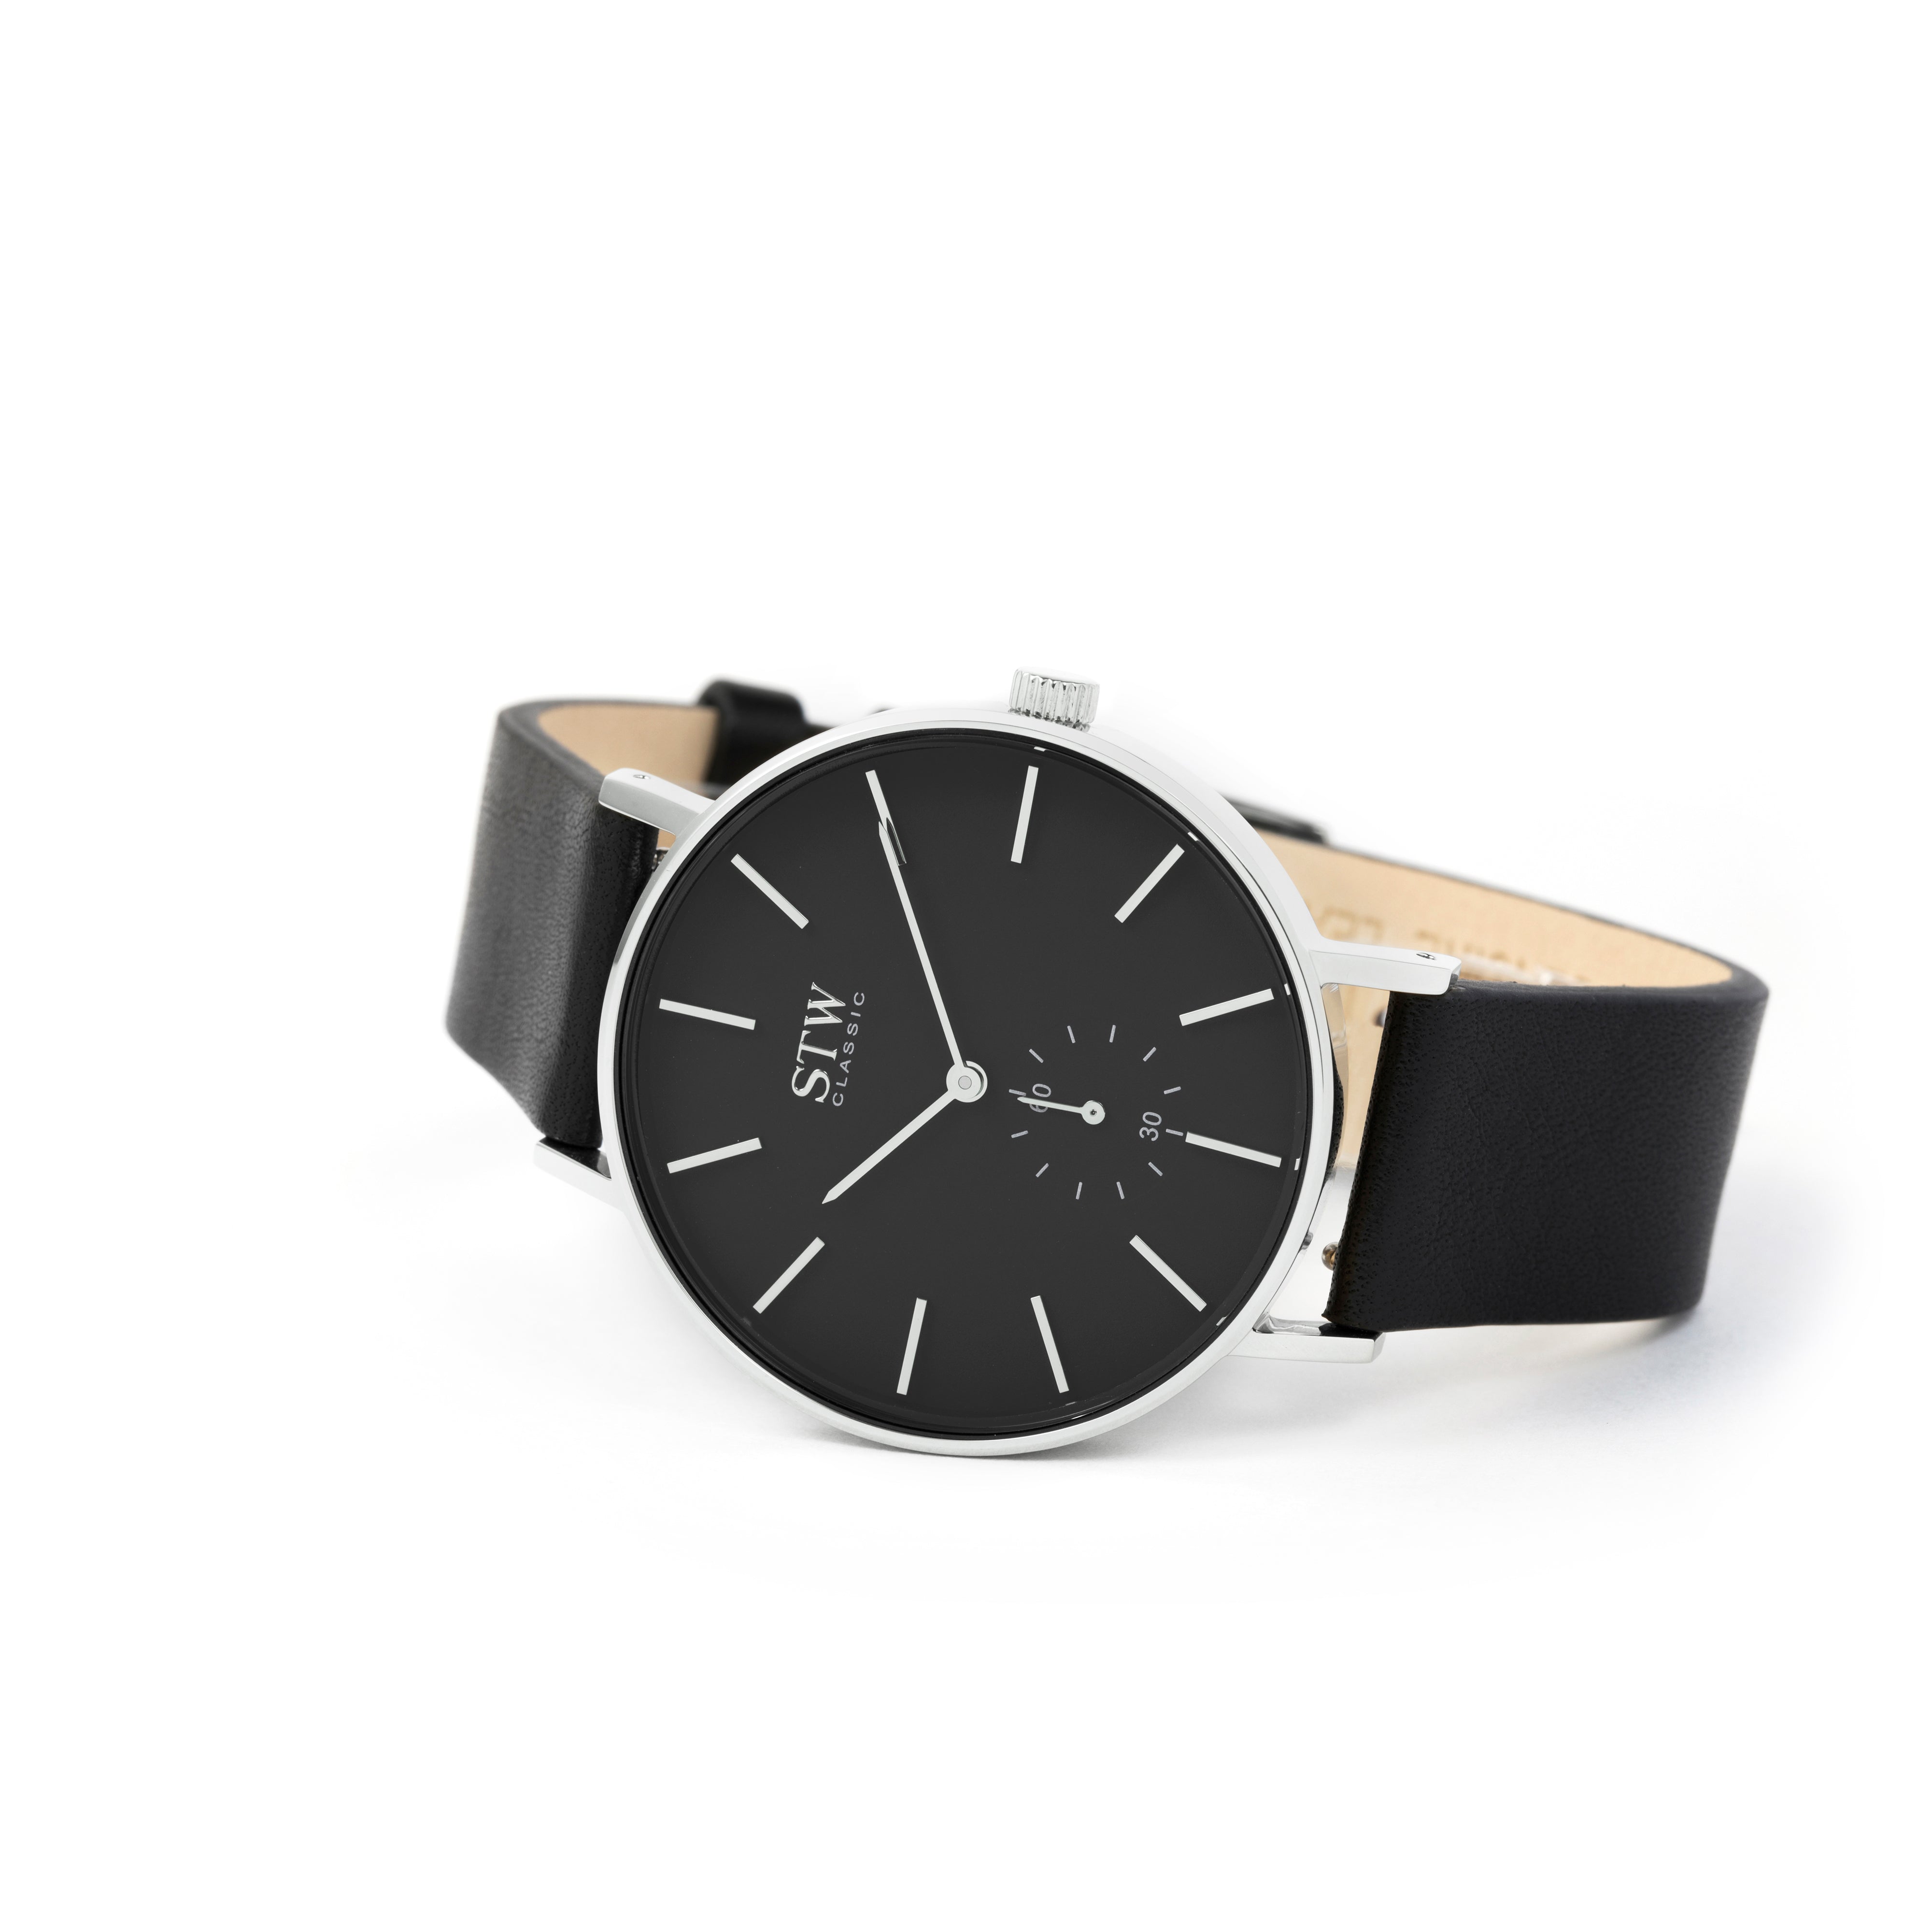 THE CLASSIC -  BLACK DIAL WITH BLACK LEATHER STRAP WATCH